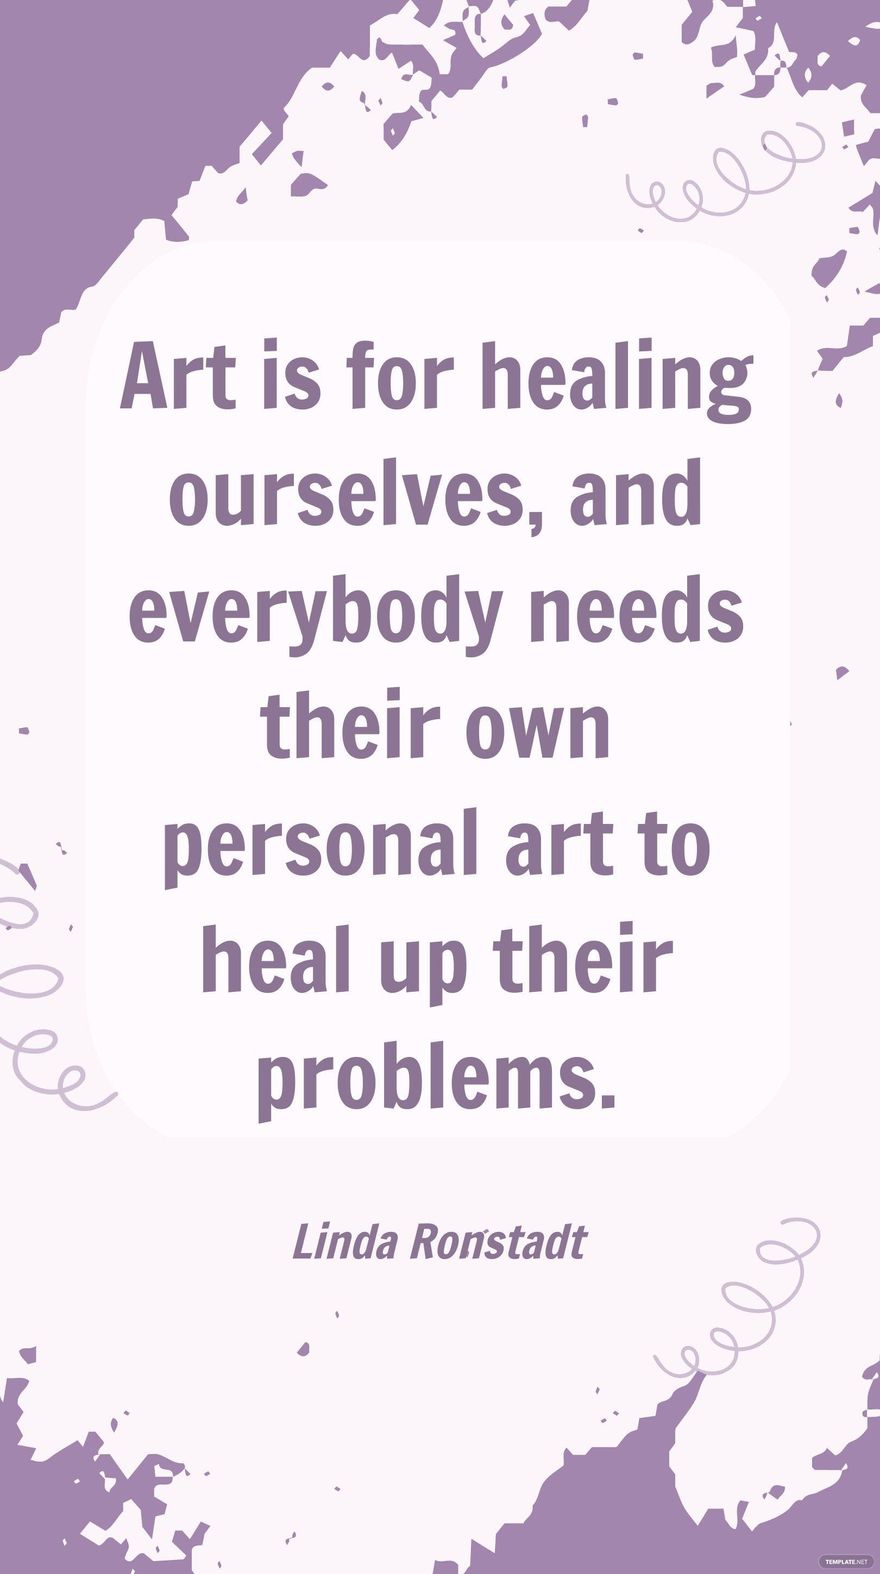 Linda Ronstadt - Art is for healing ourselves, and everybody needs their own personal art to heal up their problems.